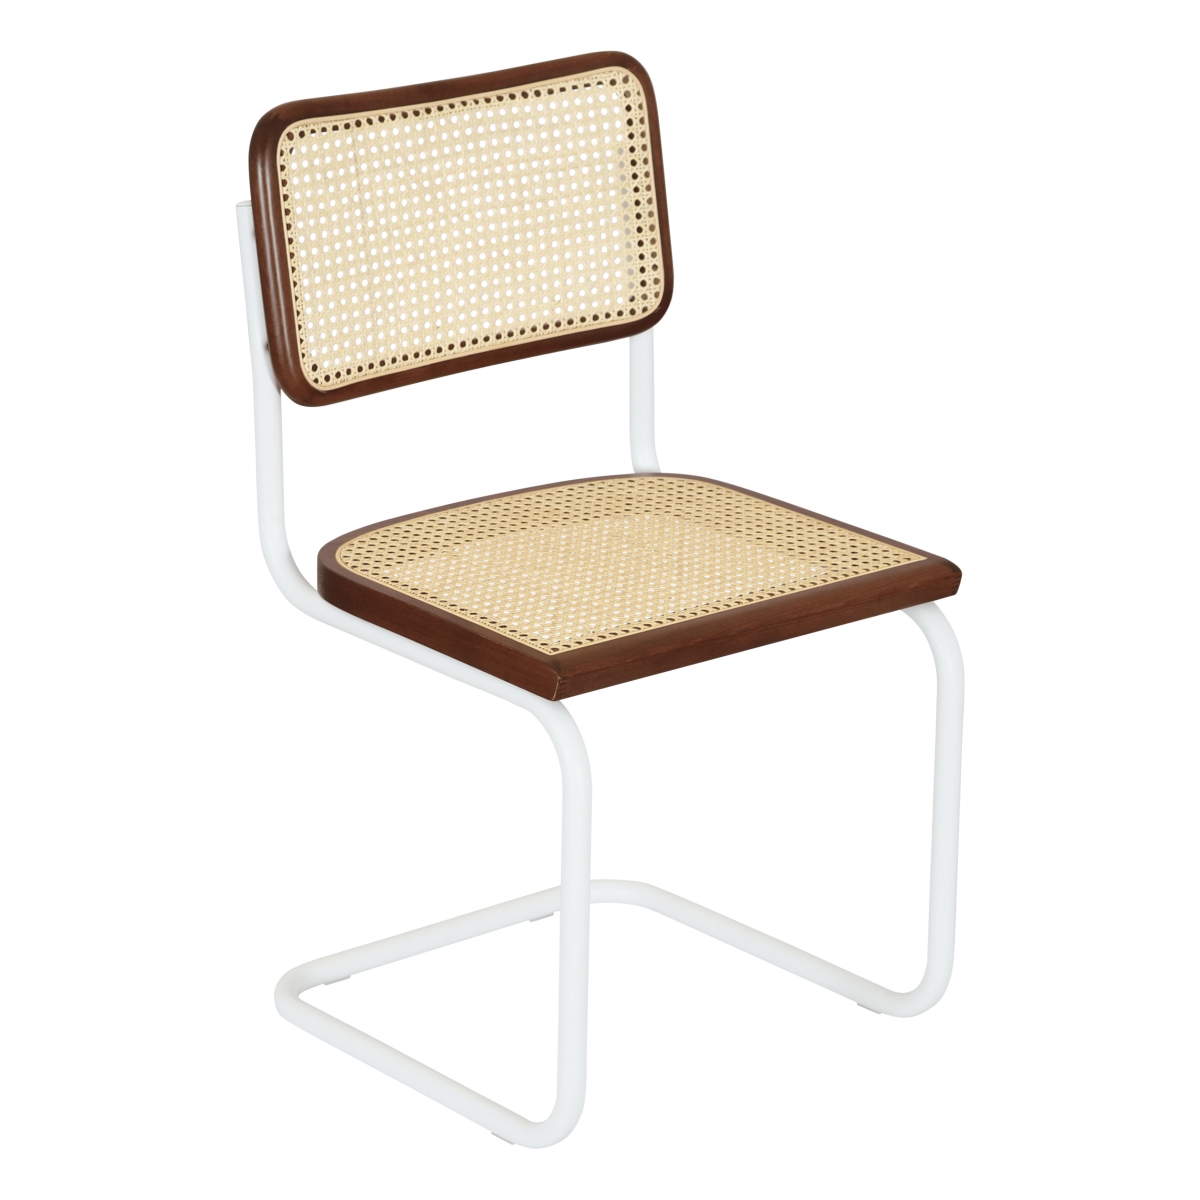 Picture of Breuer Chair Company UNB-BCC-CSCA-SC-WHTF-WLNTW-NTRLC Breuer Chair Company Marcel Breuer B32 Cesca Cane Cantilever Side Chair w/ White Steel Frame Walnut Wood & Natural Cane (Made in Italy) by Furnish Theory